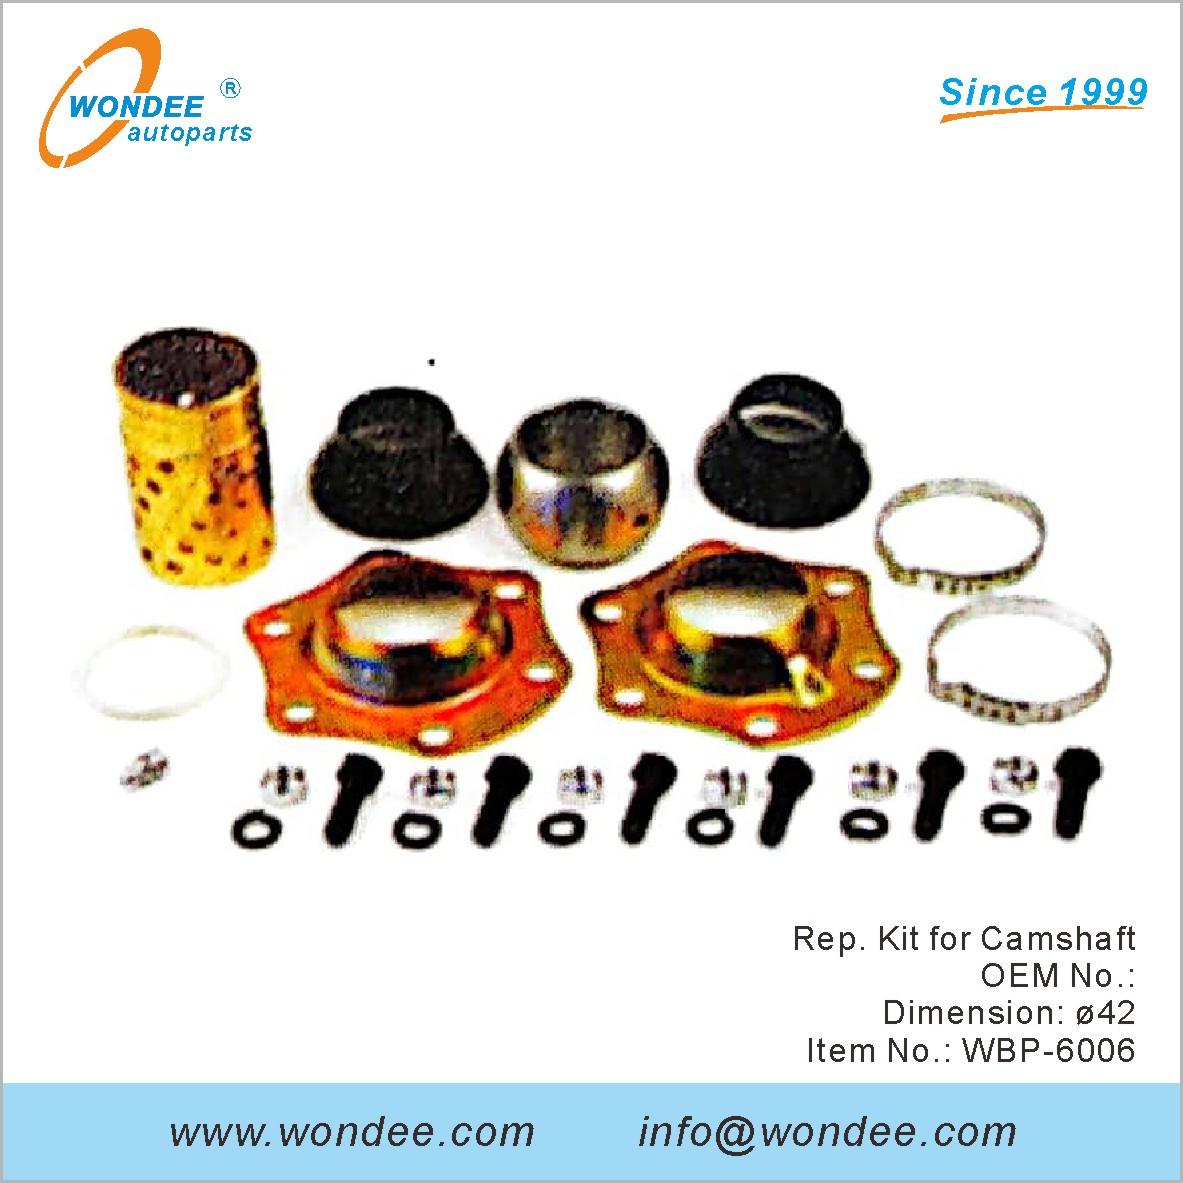 Rep Kit for Camshaft OEM for BPW from WONDEE